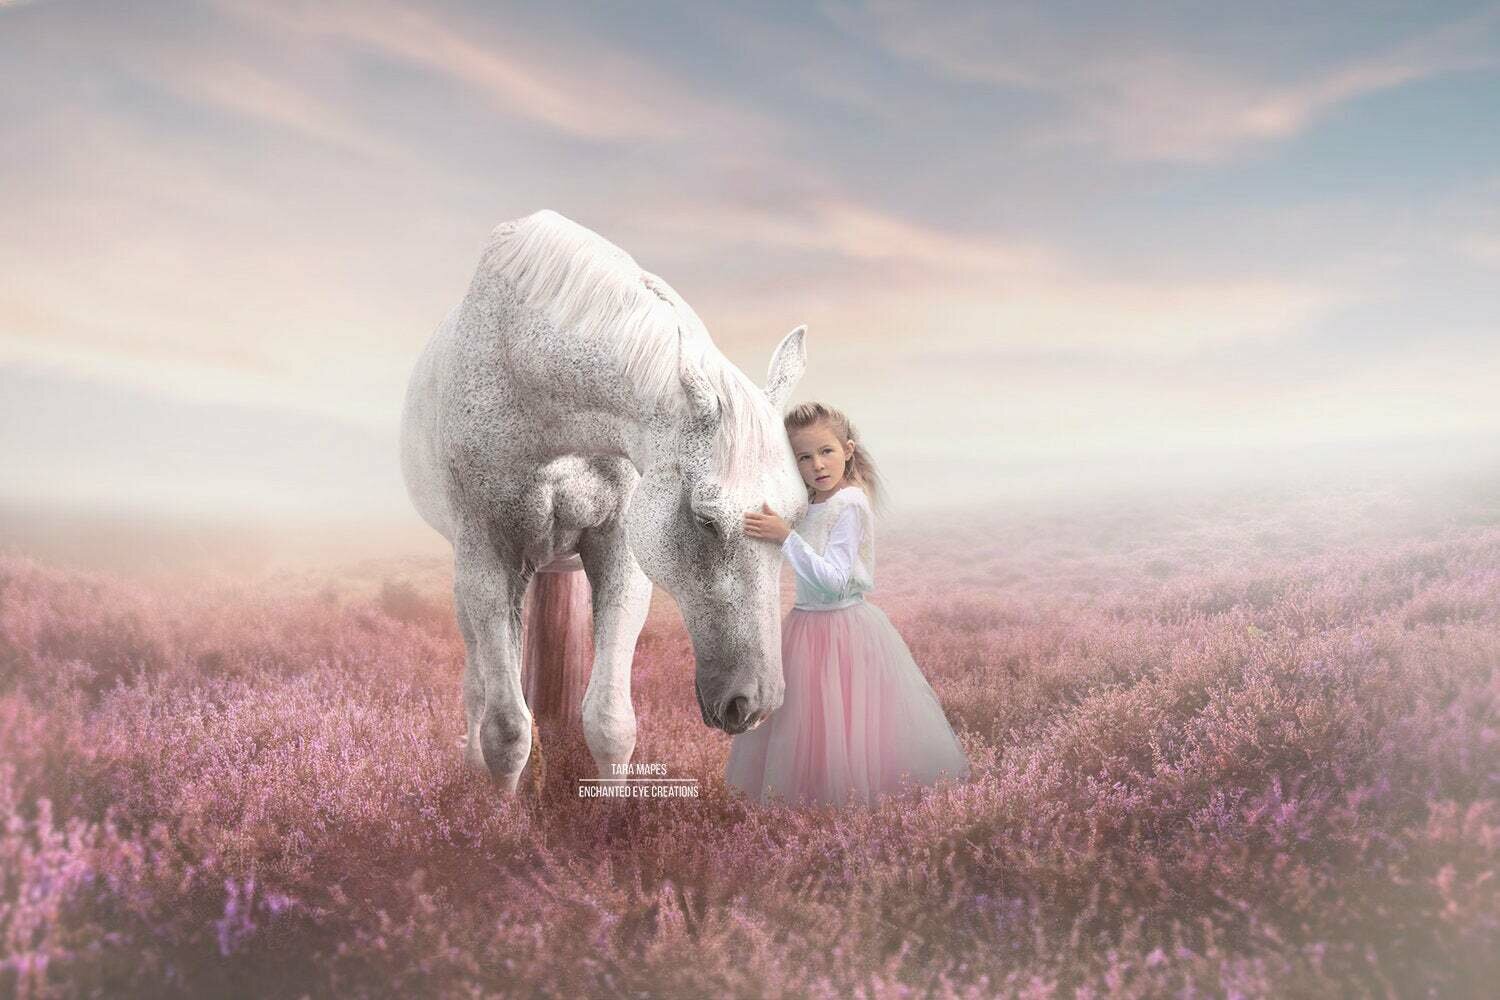 Horse in Field of Heather Lavender Flowers with Sun Creamy Pastel Digital Background Backdrop